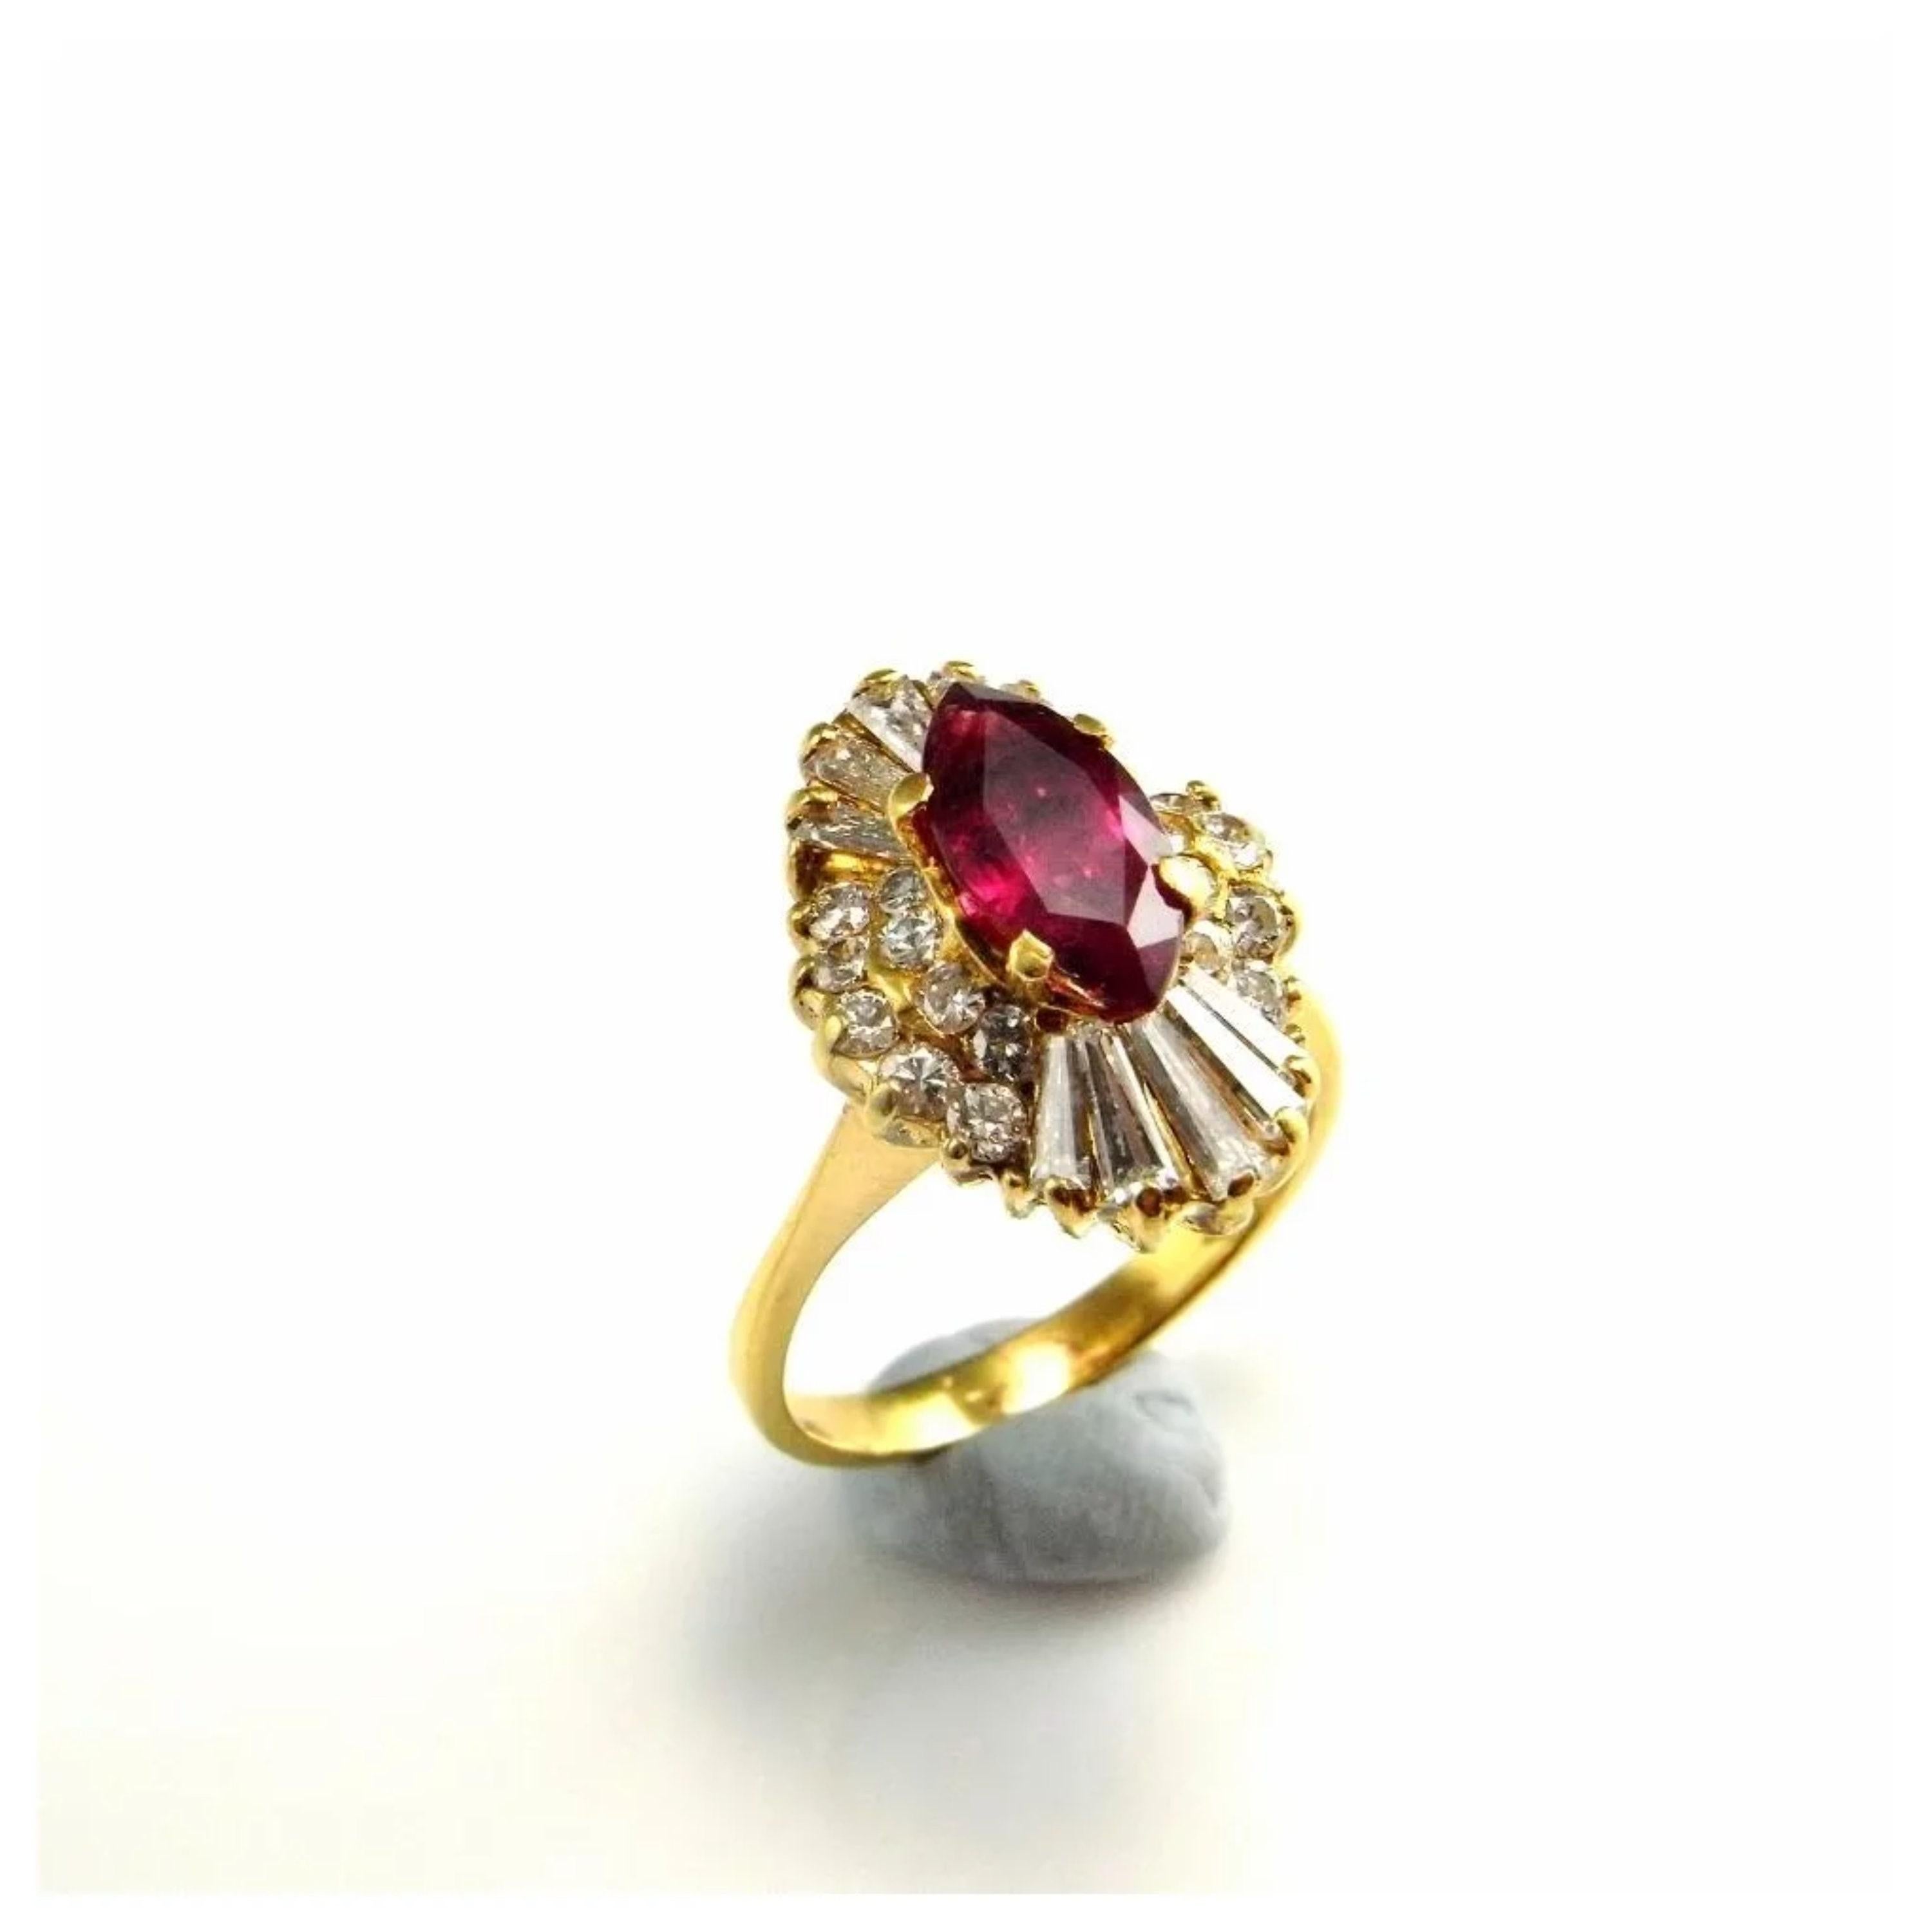 For Sale:  2 Carat Marquise Cut Ruby Diamond Engagement Ring, Ruby Diamond Wedding Ring 2